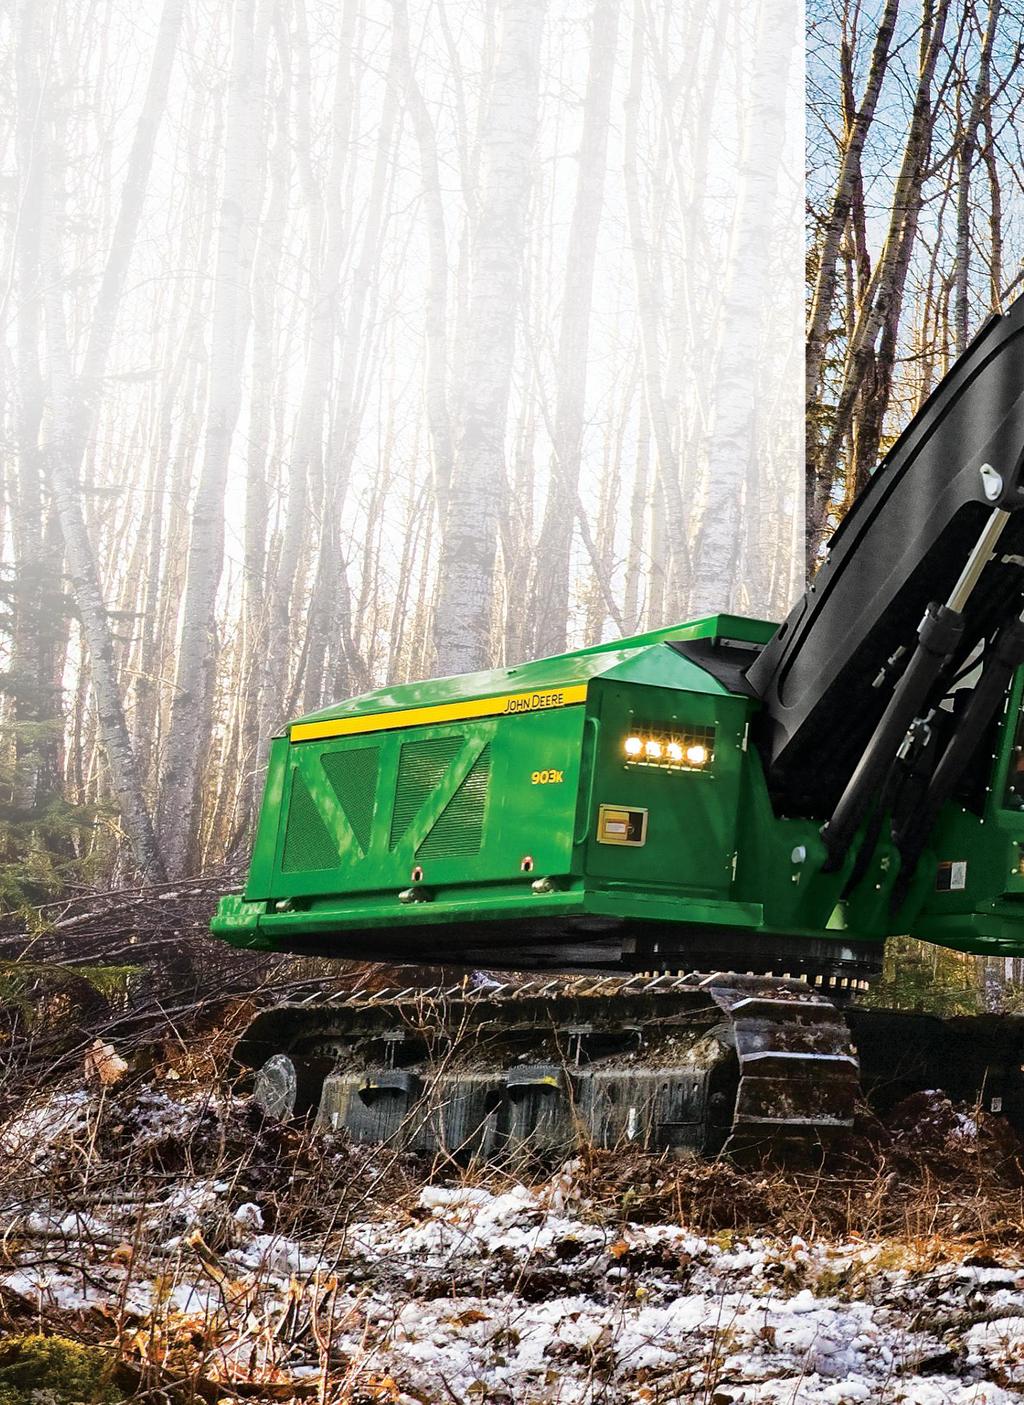 Tough bunch of fellers. Loggers demand maximum productivity and uptime out of their equipment, shift after shift. And John Deere 700J-Series and 900K-Series Tracked Feller Bunchers deliver, big time.